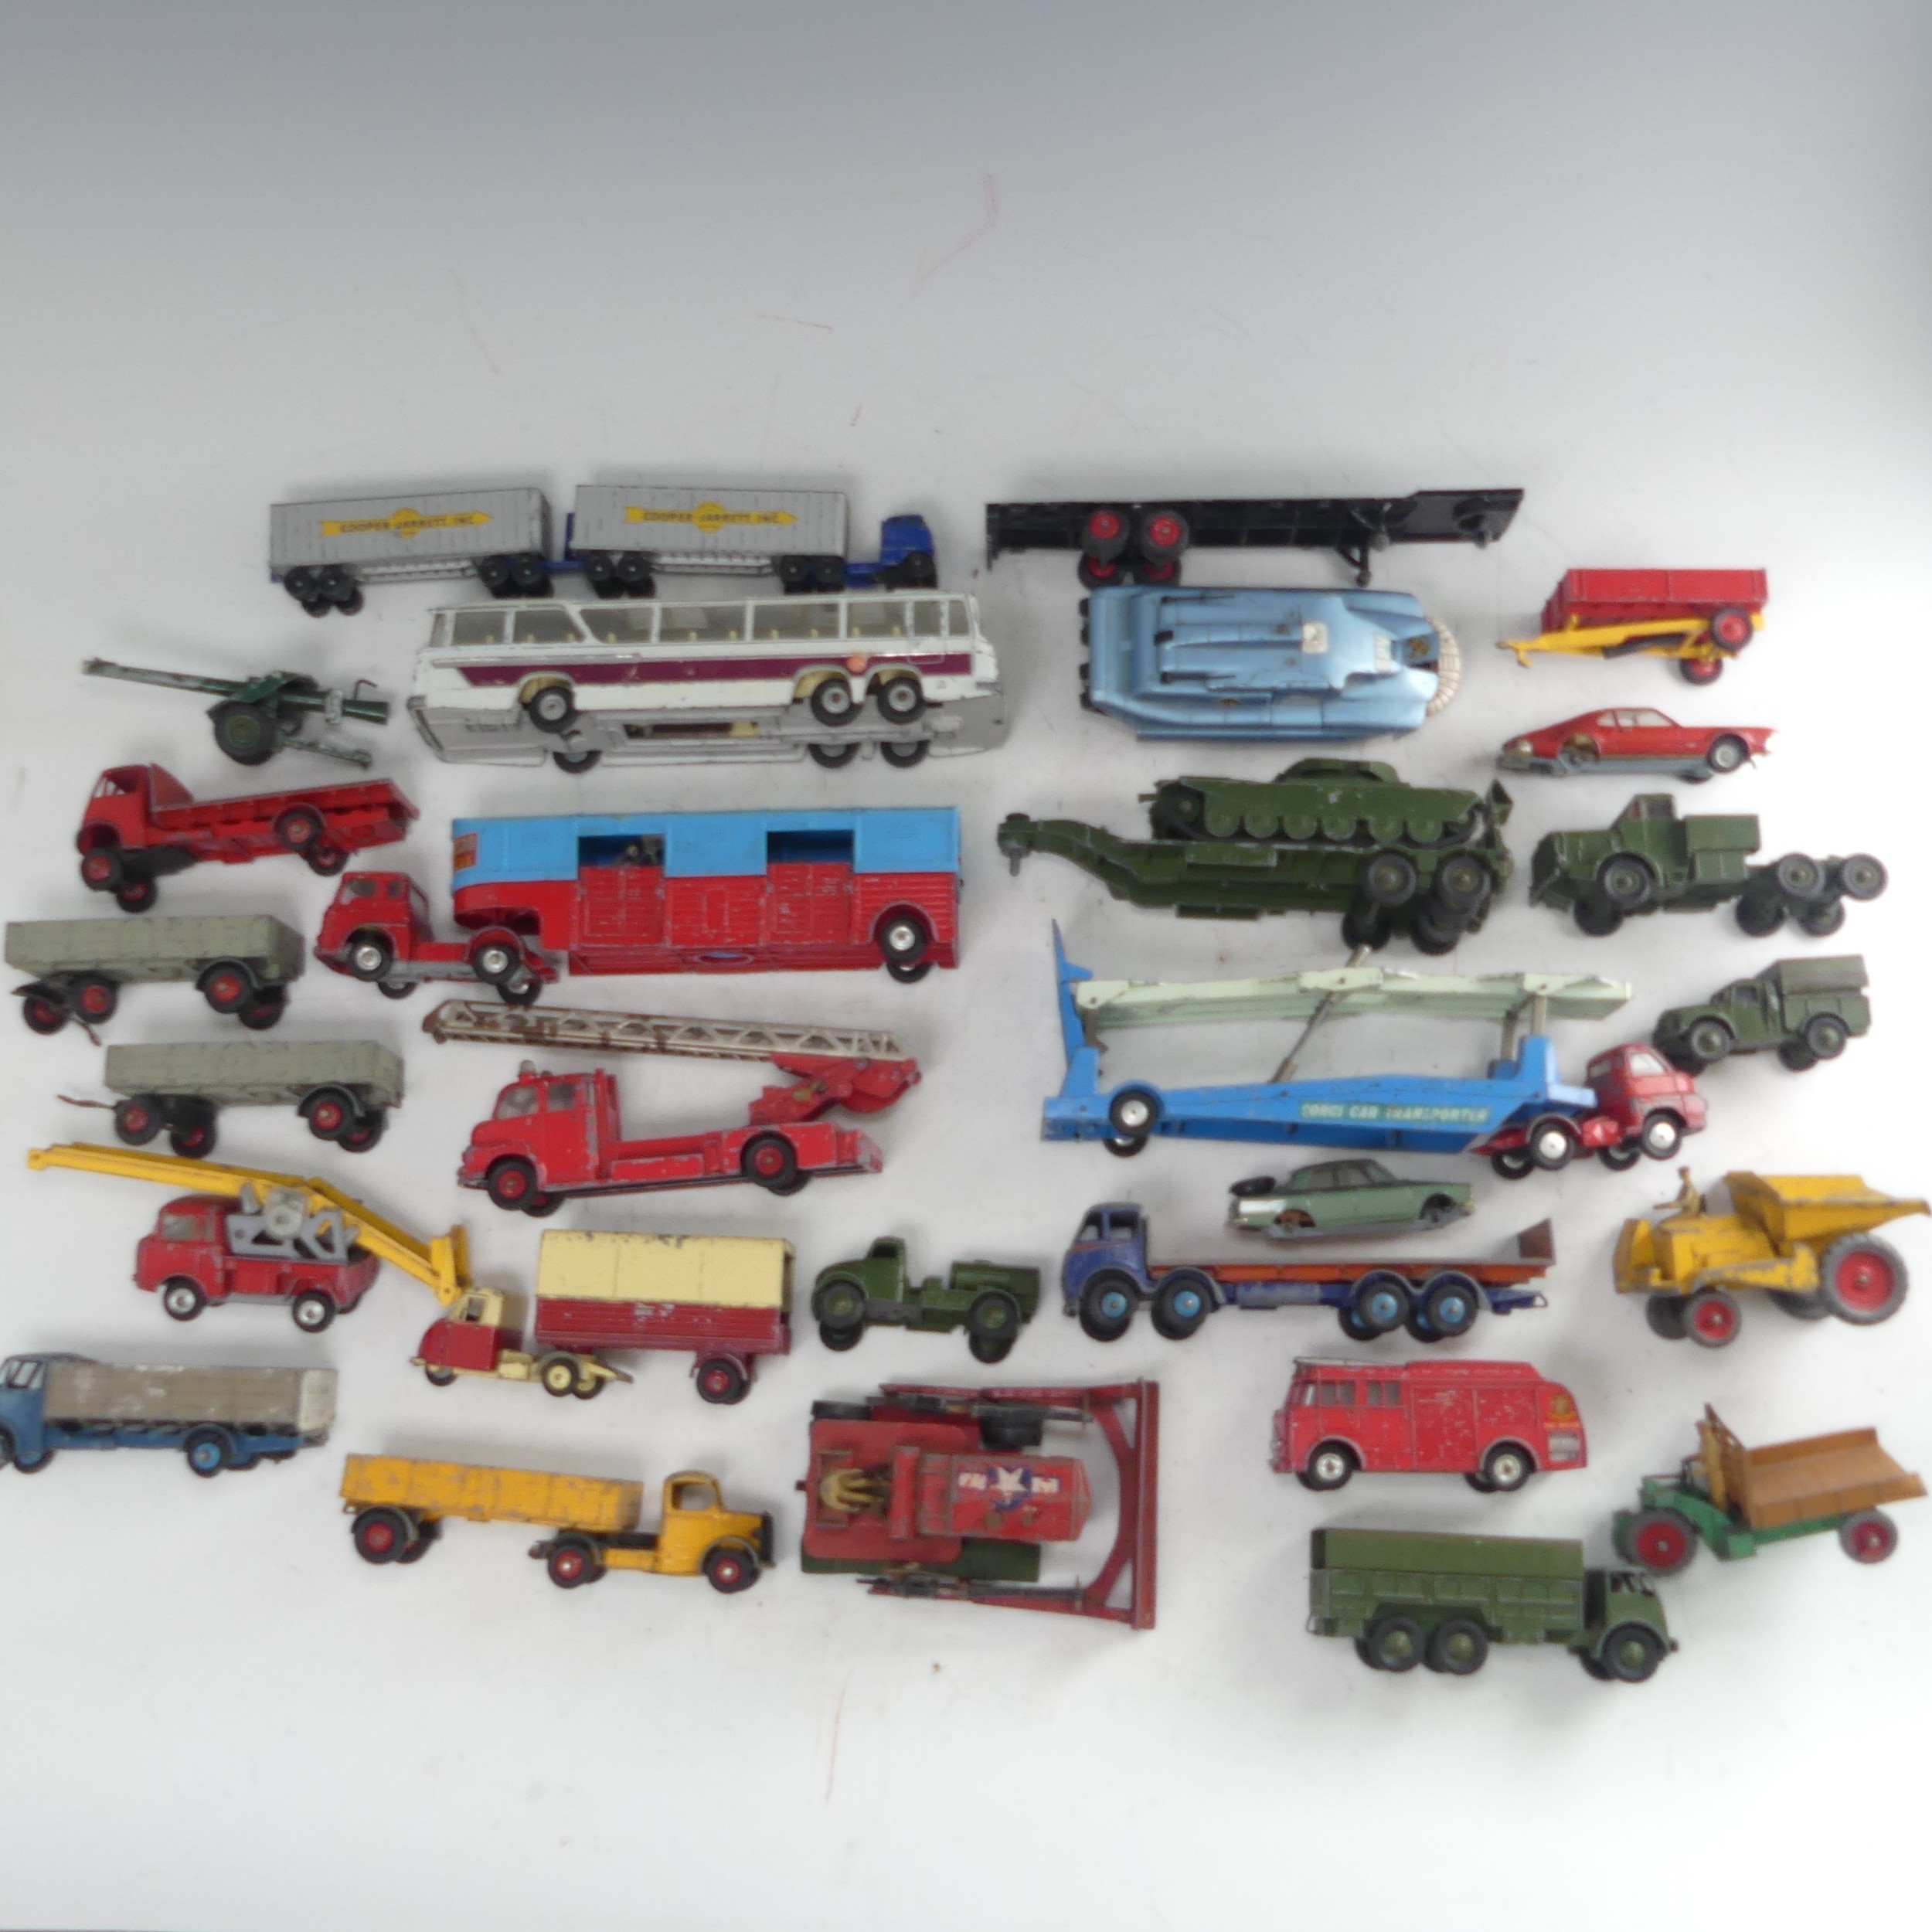 A collection of play-worn die-cast metal toy model cars, commercial and army vehicles, mostly - Bild 3 aus 3